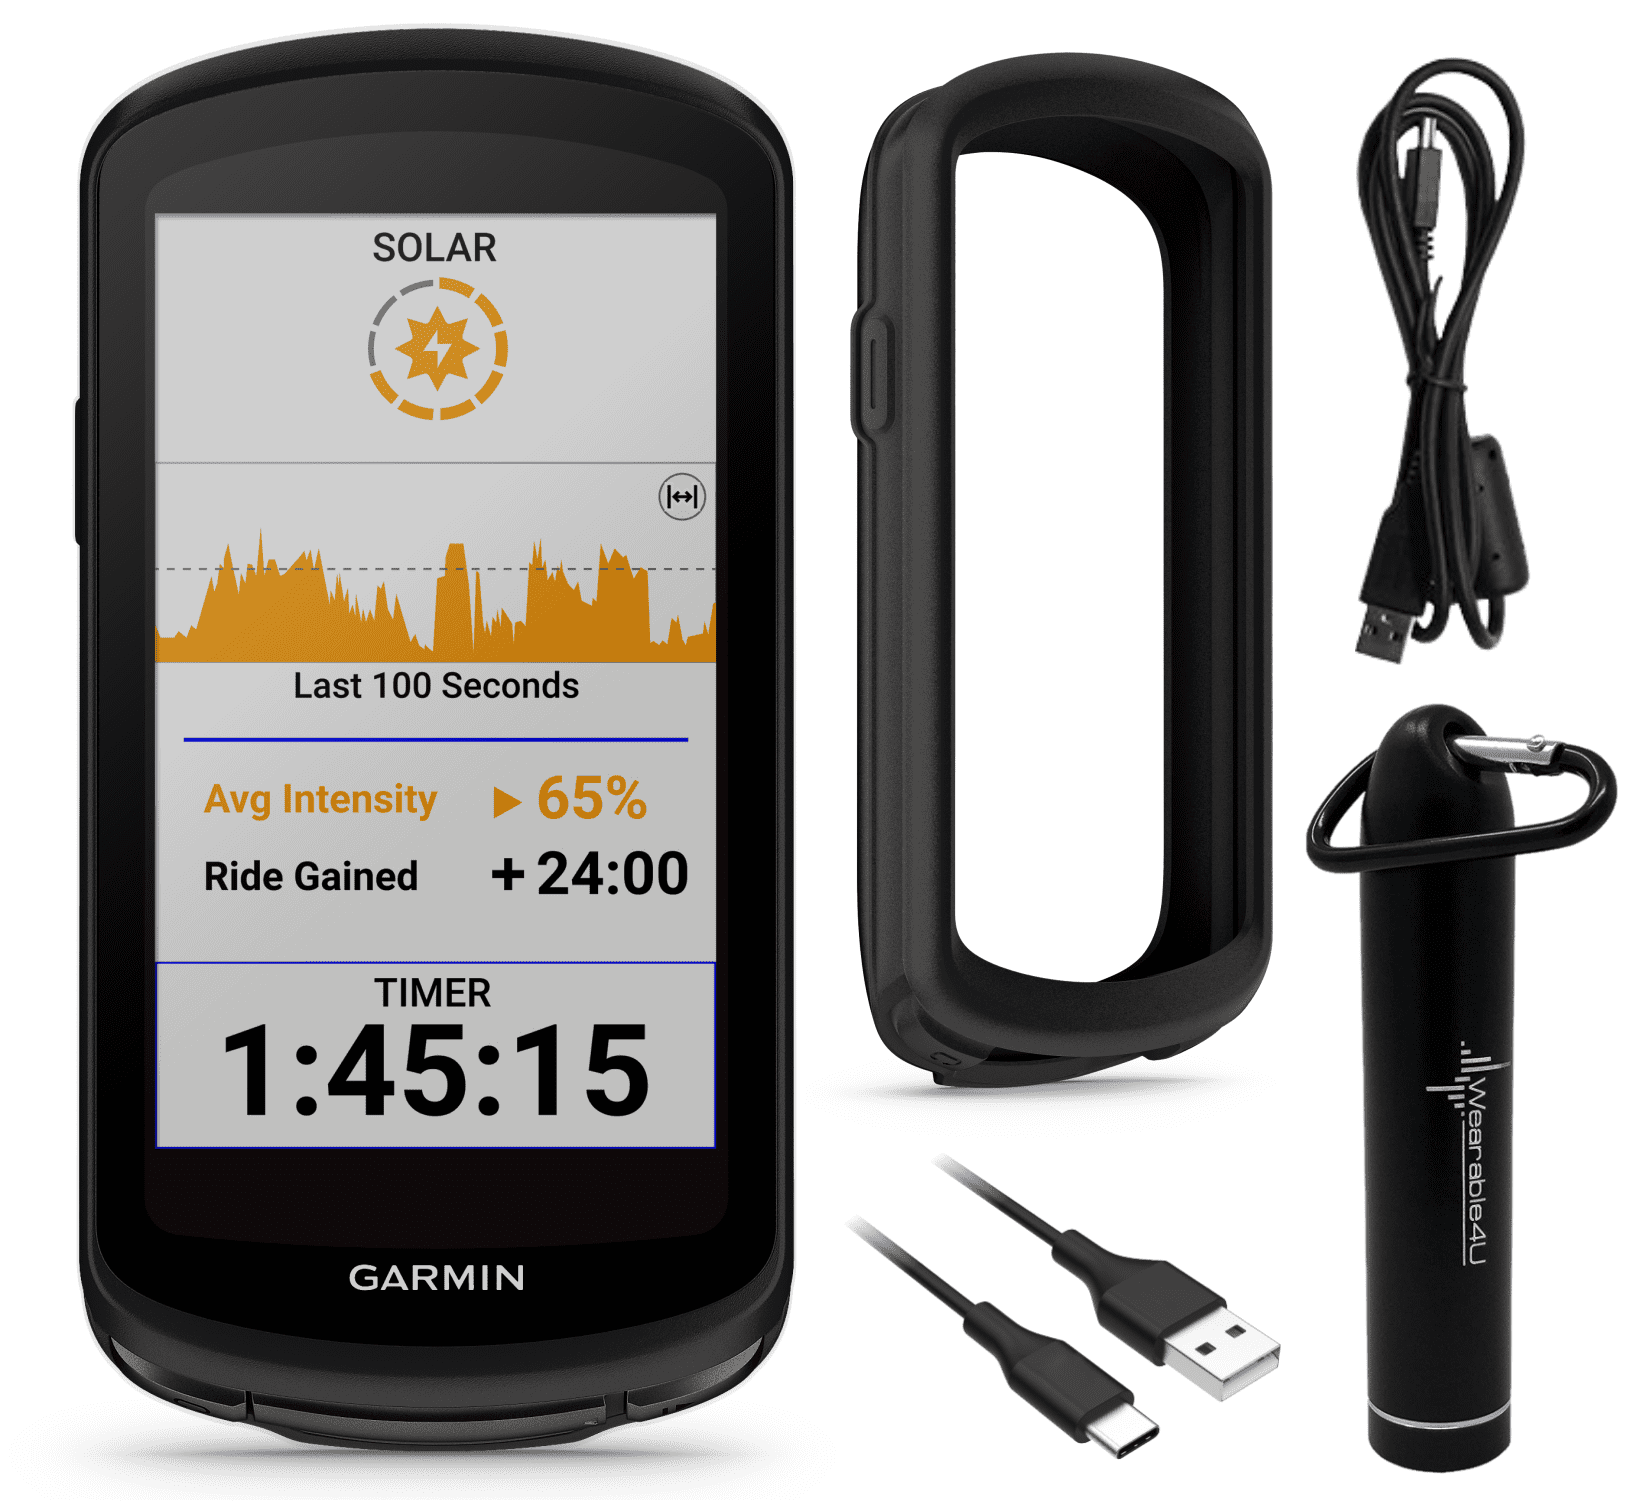 Garmin Edge 1040 Cycling Computer with Solar Charging Capabilities, On and Off-Road with Wearable4U Power Bank Bundle - Walmart.com